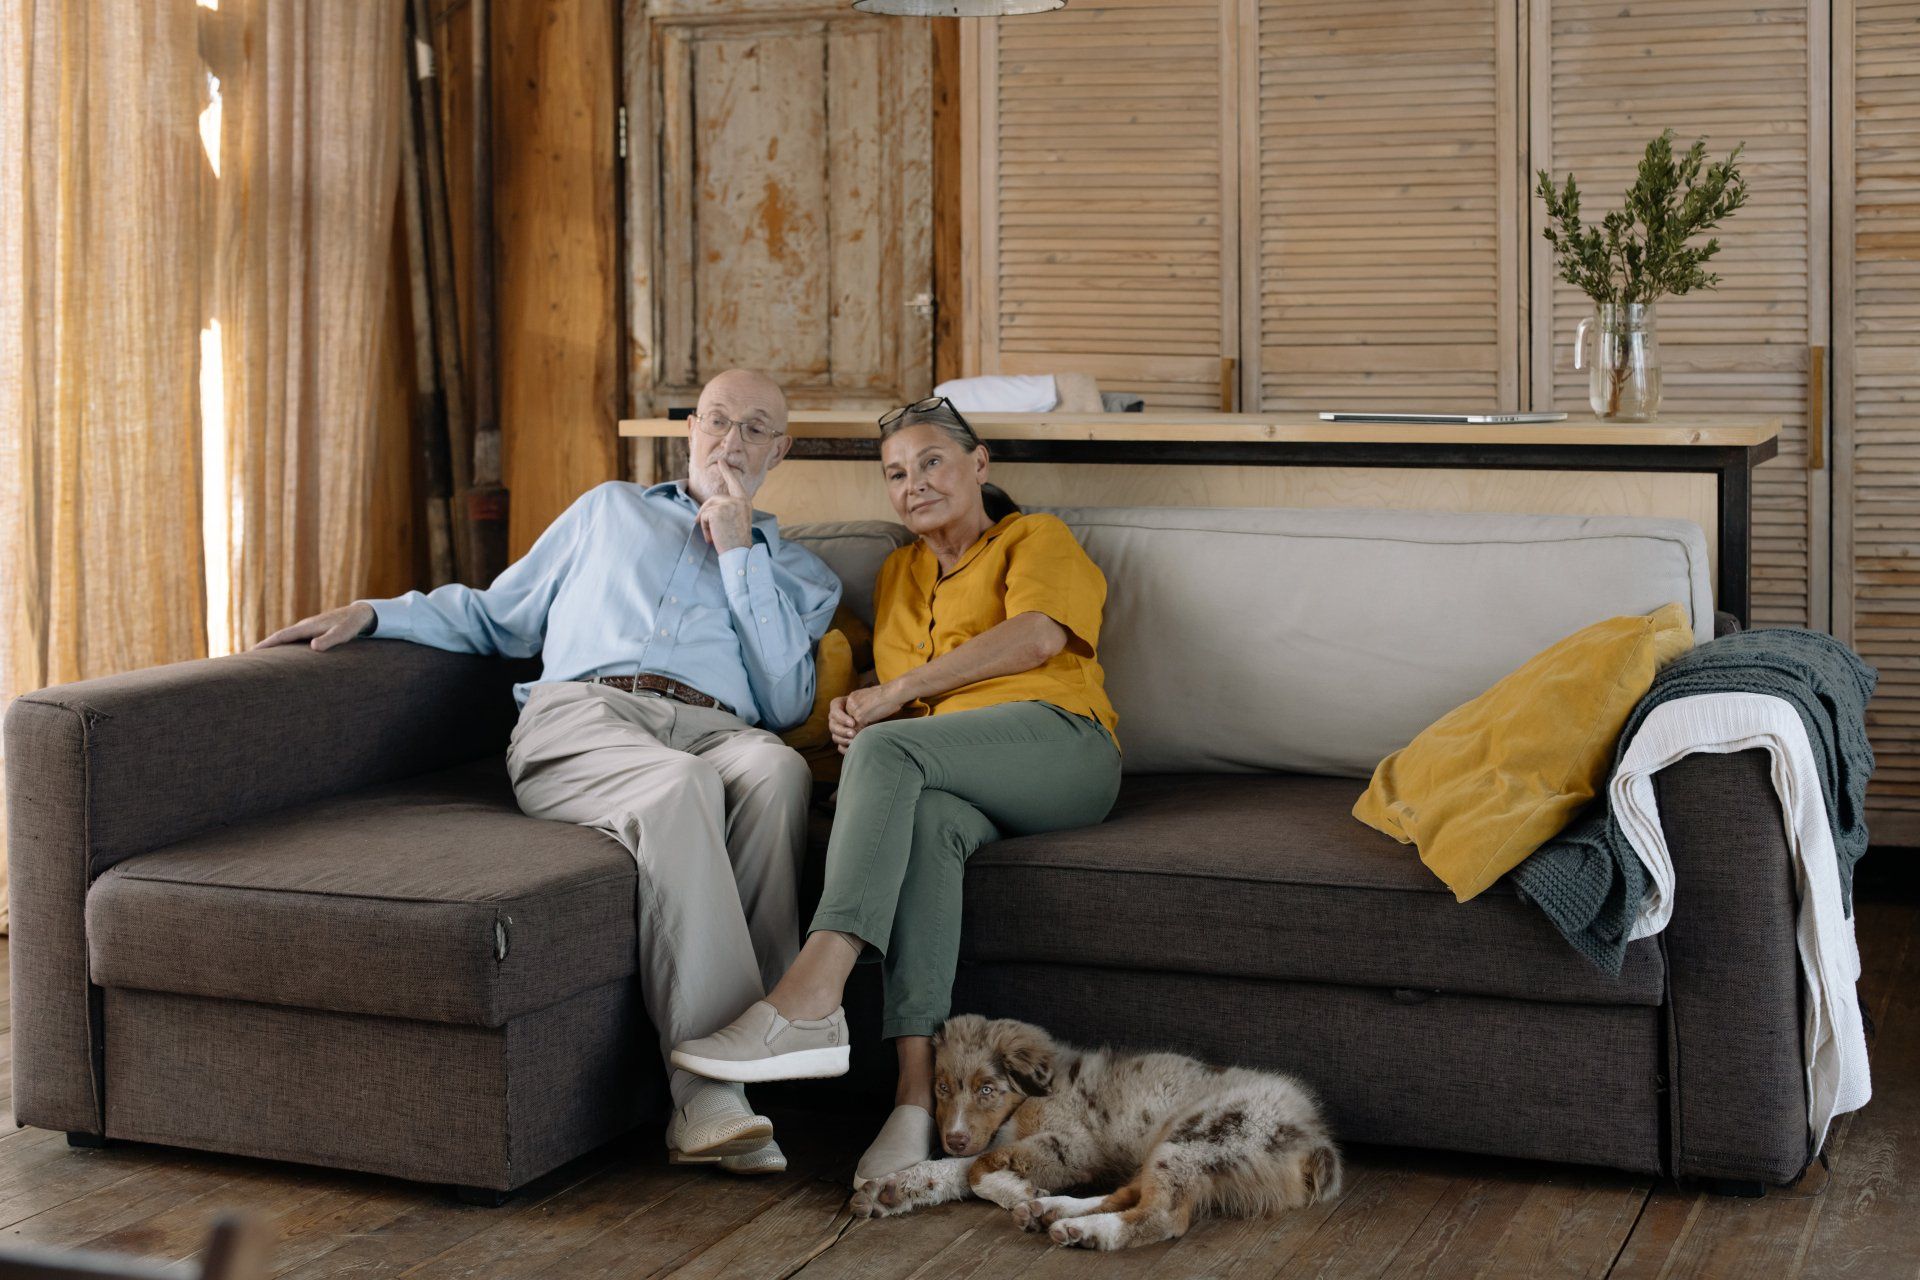 Older Couple Sitting on the Sofa with Their Dog - Conveyancing In Tumbi Umbi, NSW